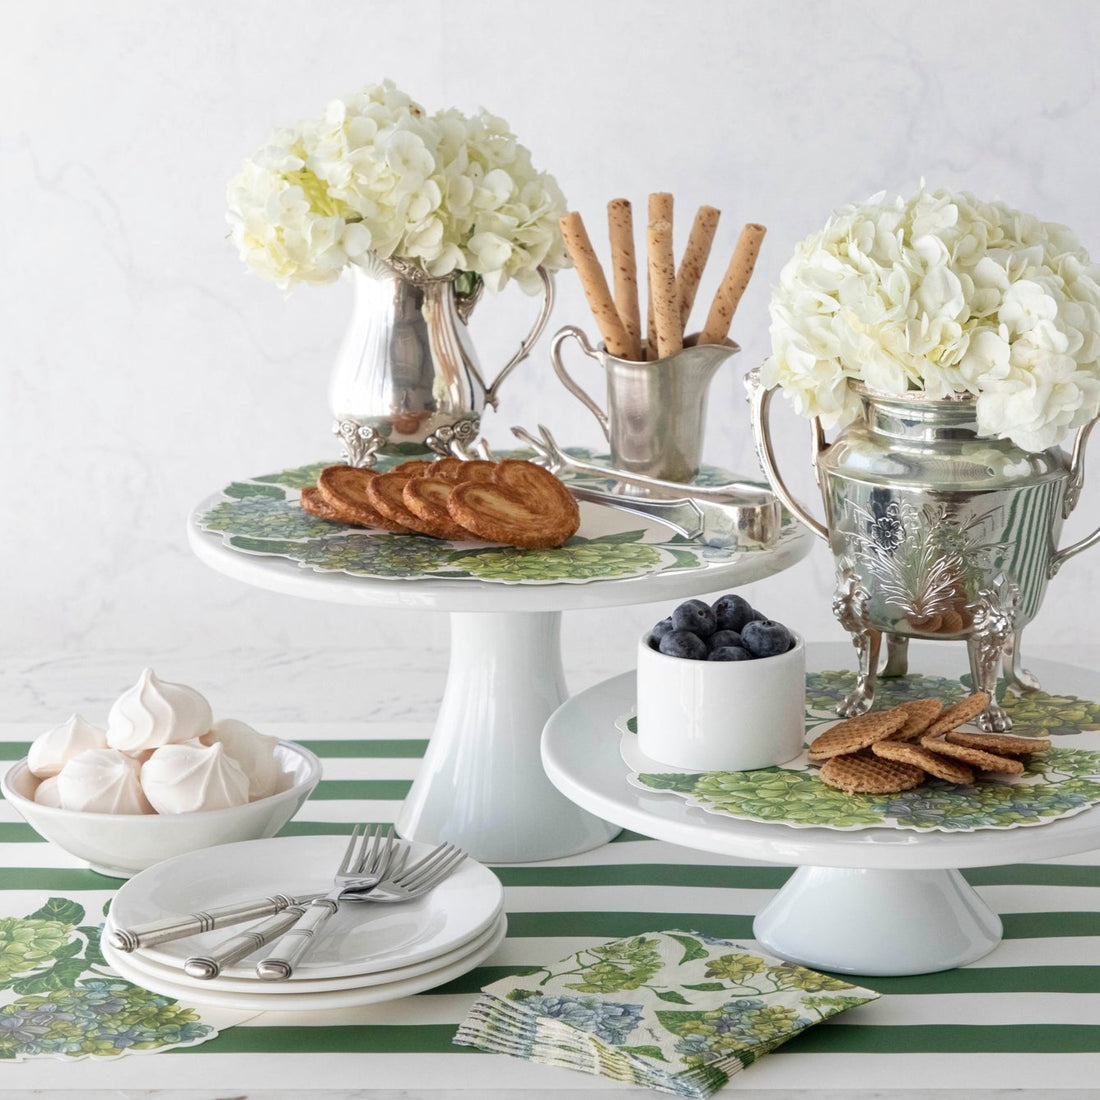 Hydrangea Serving Papers featured in an elegant treat spread with cake stands and vases of flowers.